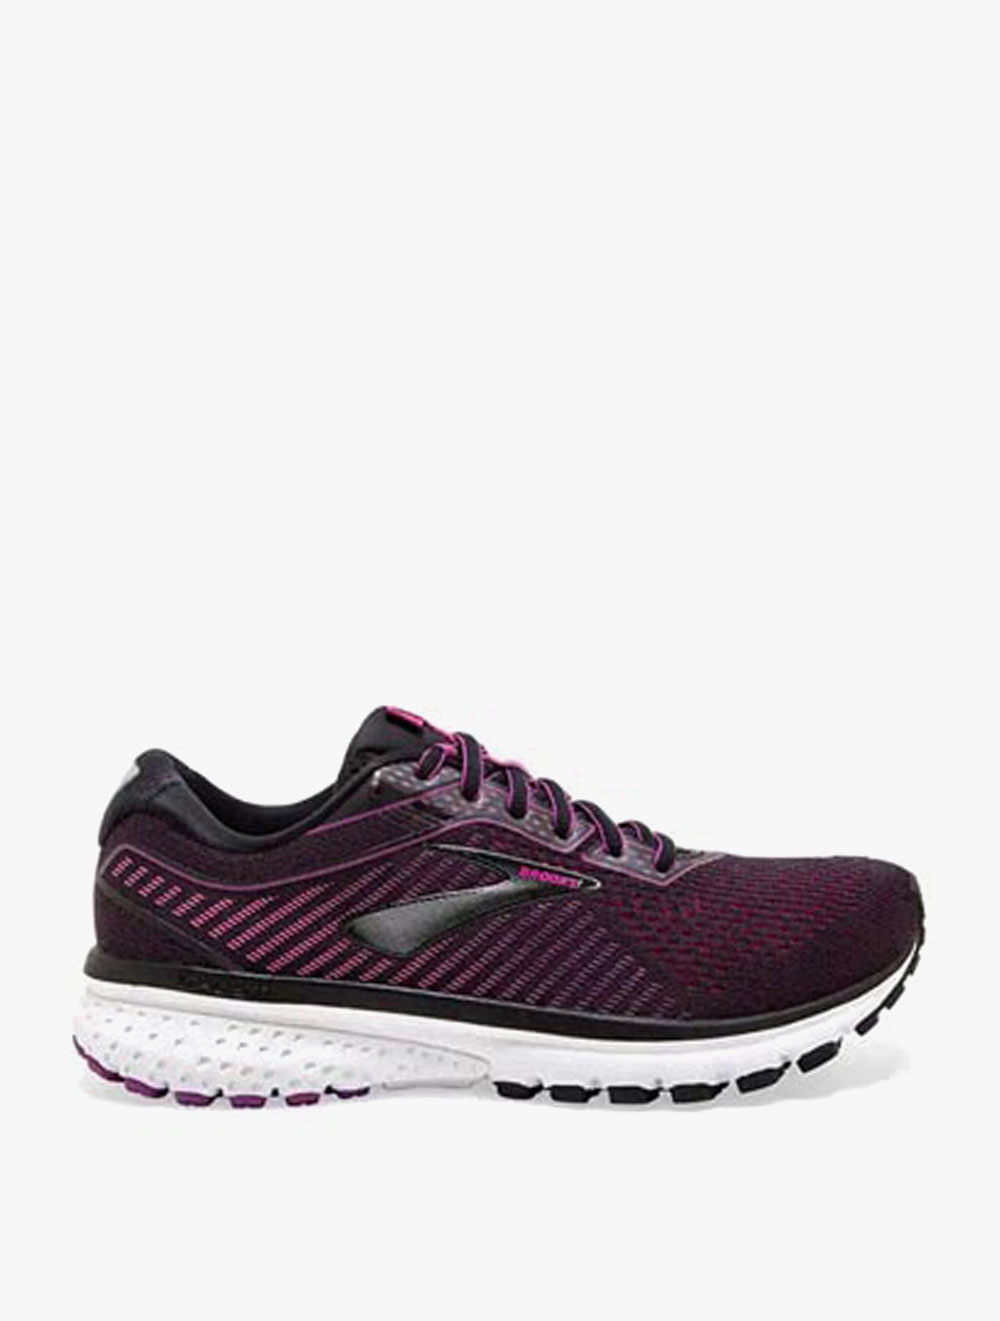 where to buy brooks shoes cheap